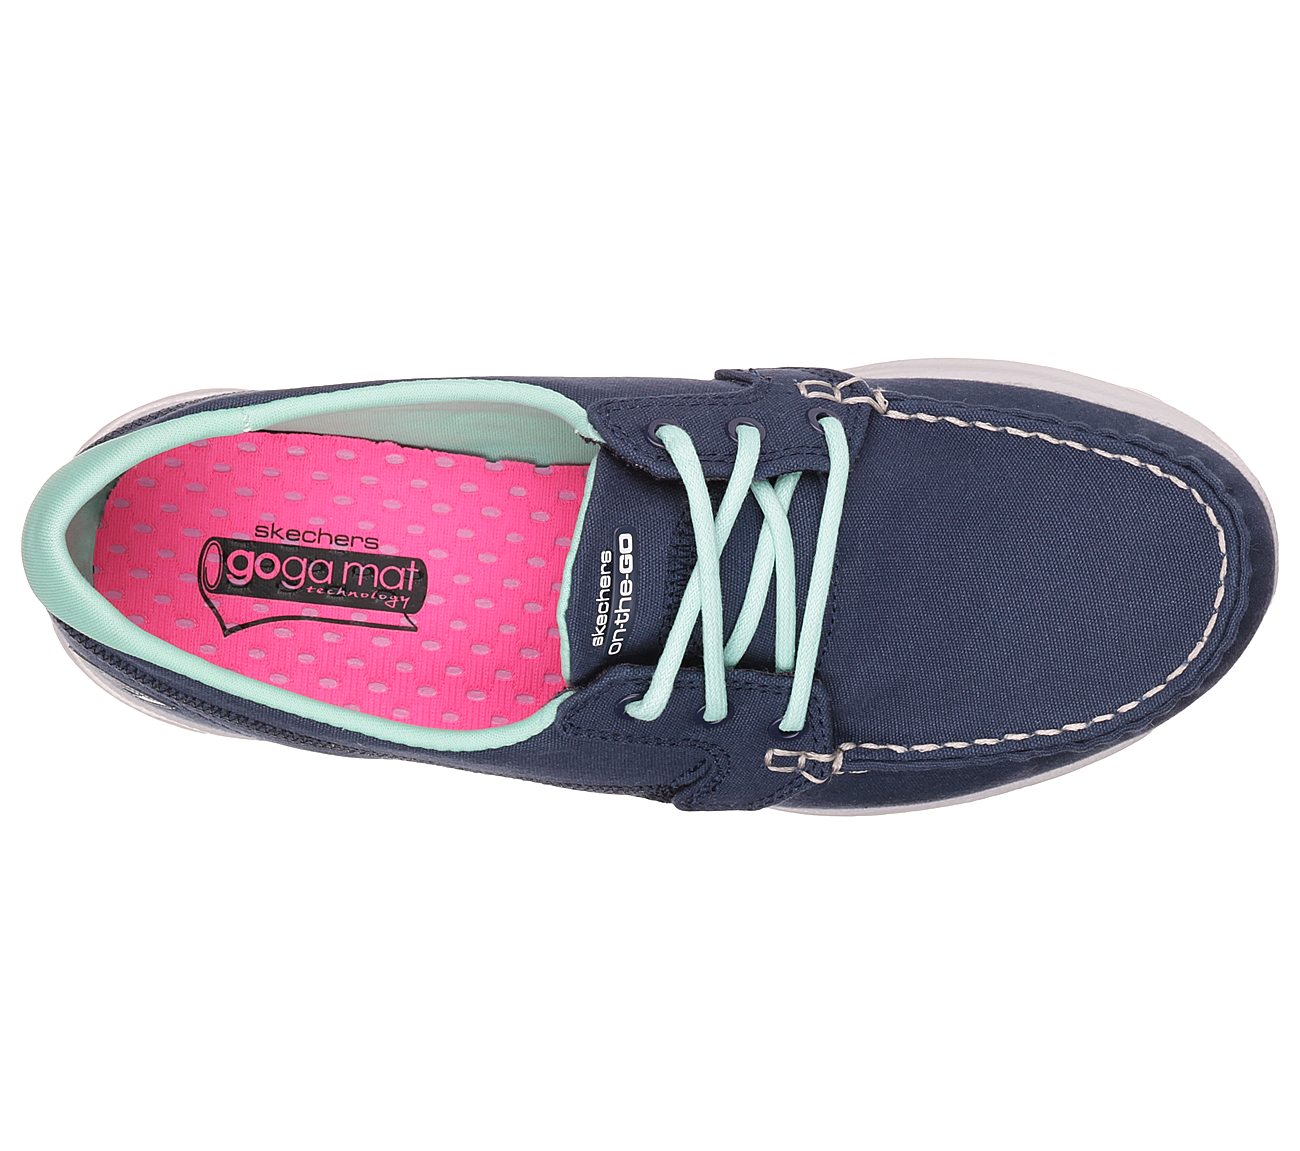 skechers on the go clipper womens boat shoes